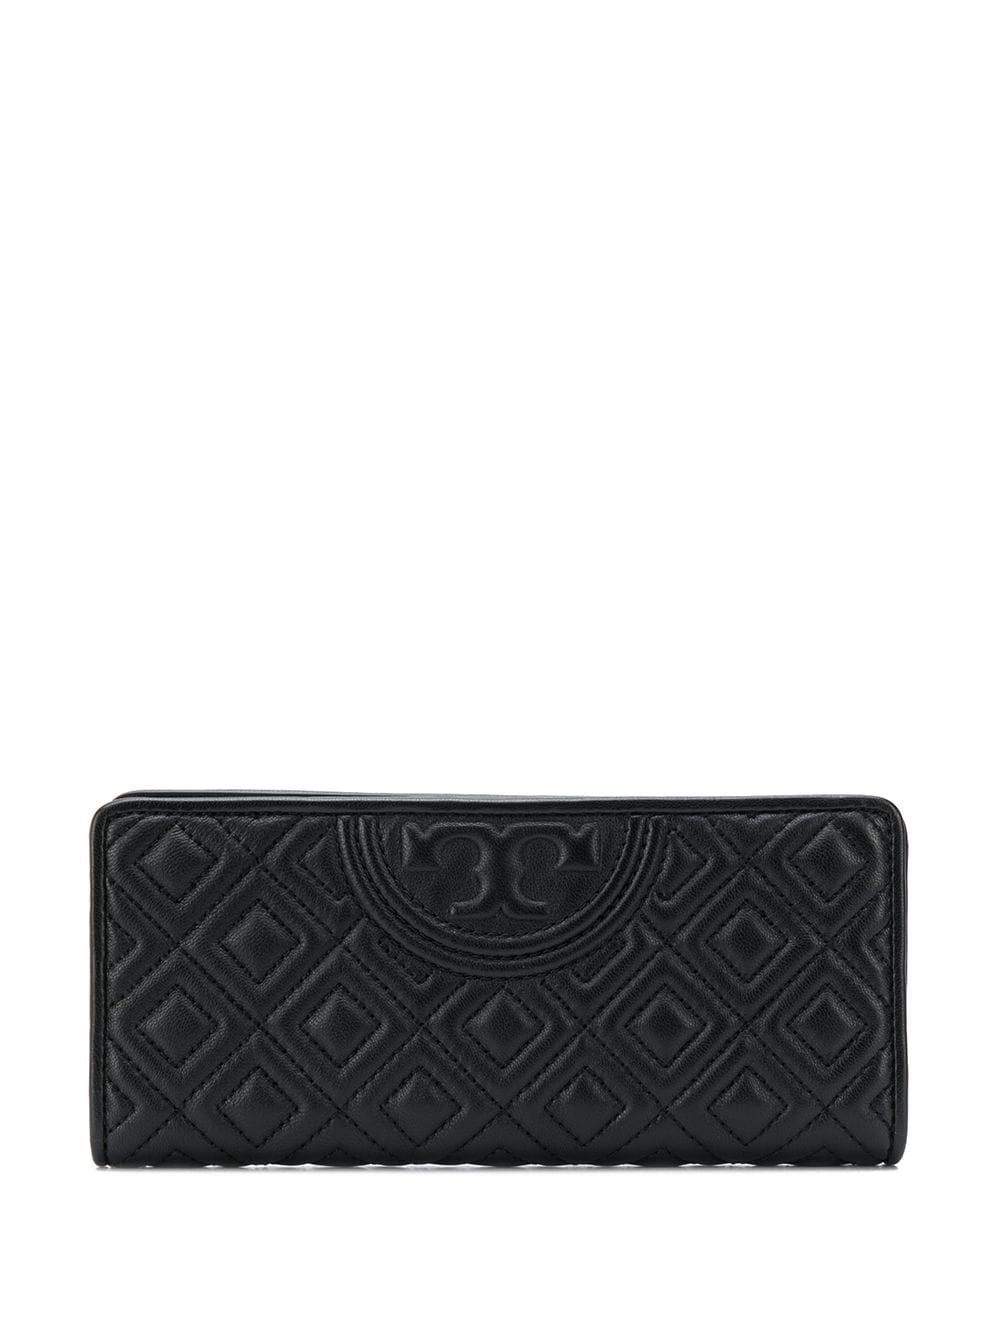 Image 1 of Tory Burch quilted logo wallet